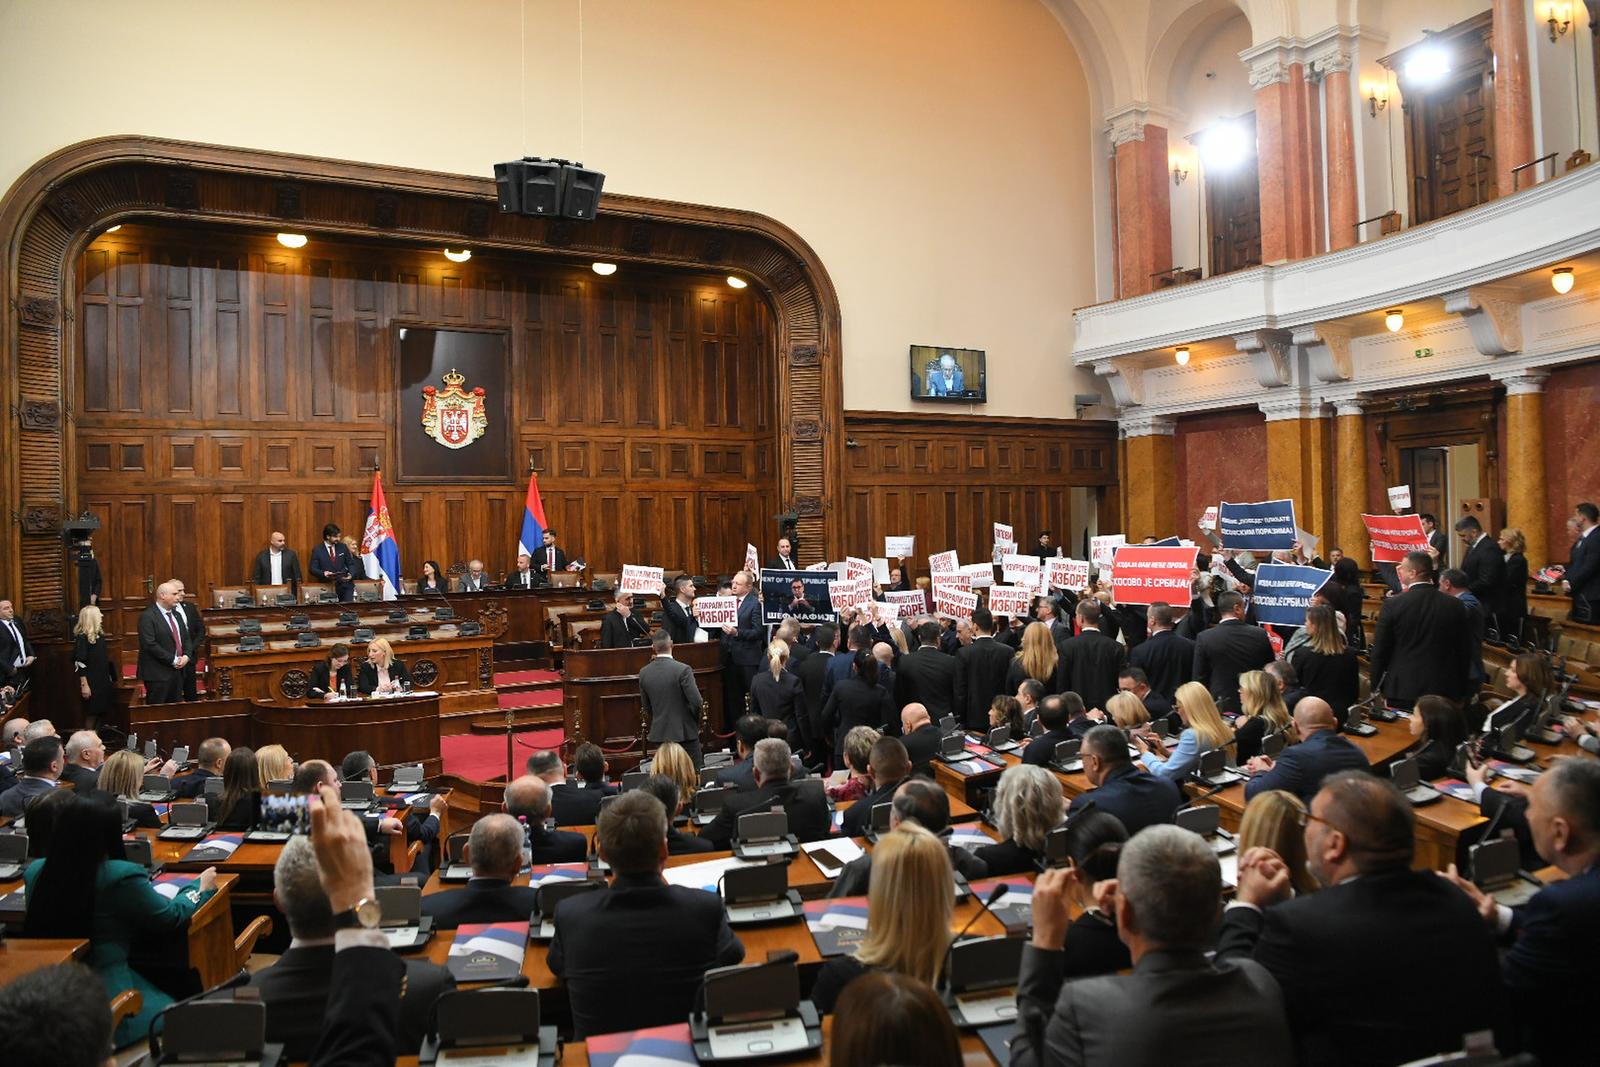 06, February, 2024, Belgrade - The first session of the 14th convocation of the Serbian Parliament will be held in the Great Hall of the National Assembly. Photo: A.H./ATAImages

06, februar, 2024, Beograd - Prva sednica 14. saziva Skupstine Srbije odrzace se u Velikoj sali Doma Narodne skupstine. Photo: A.H./ATAImages Photo: Milos Tesic/ATAImages/PIXSELL